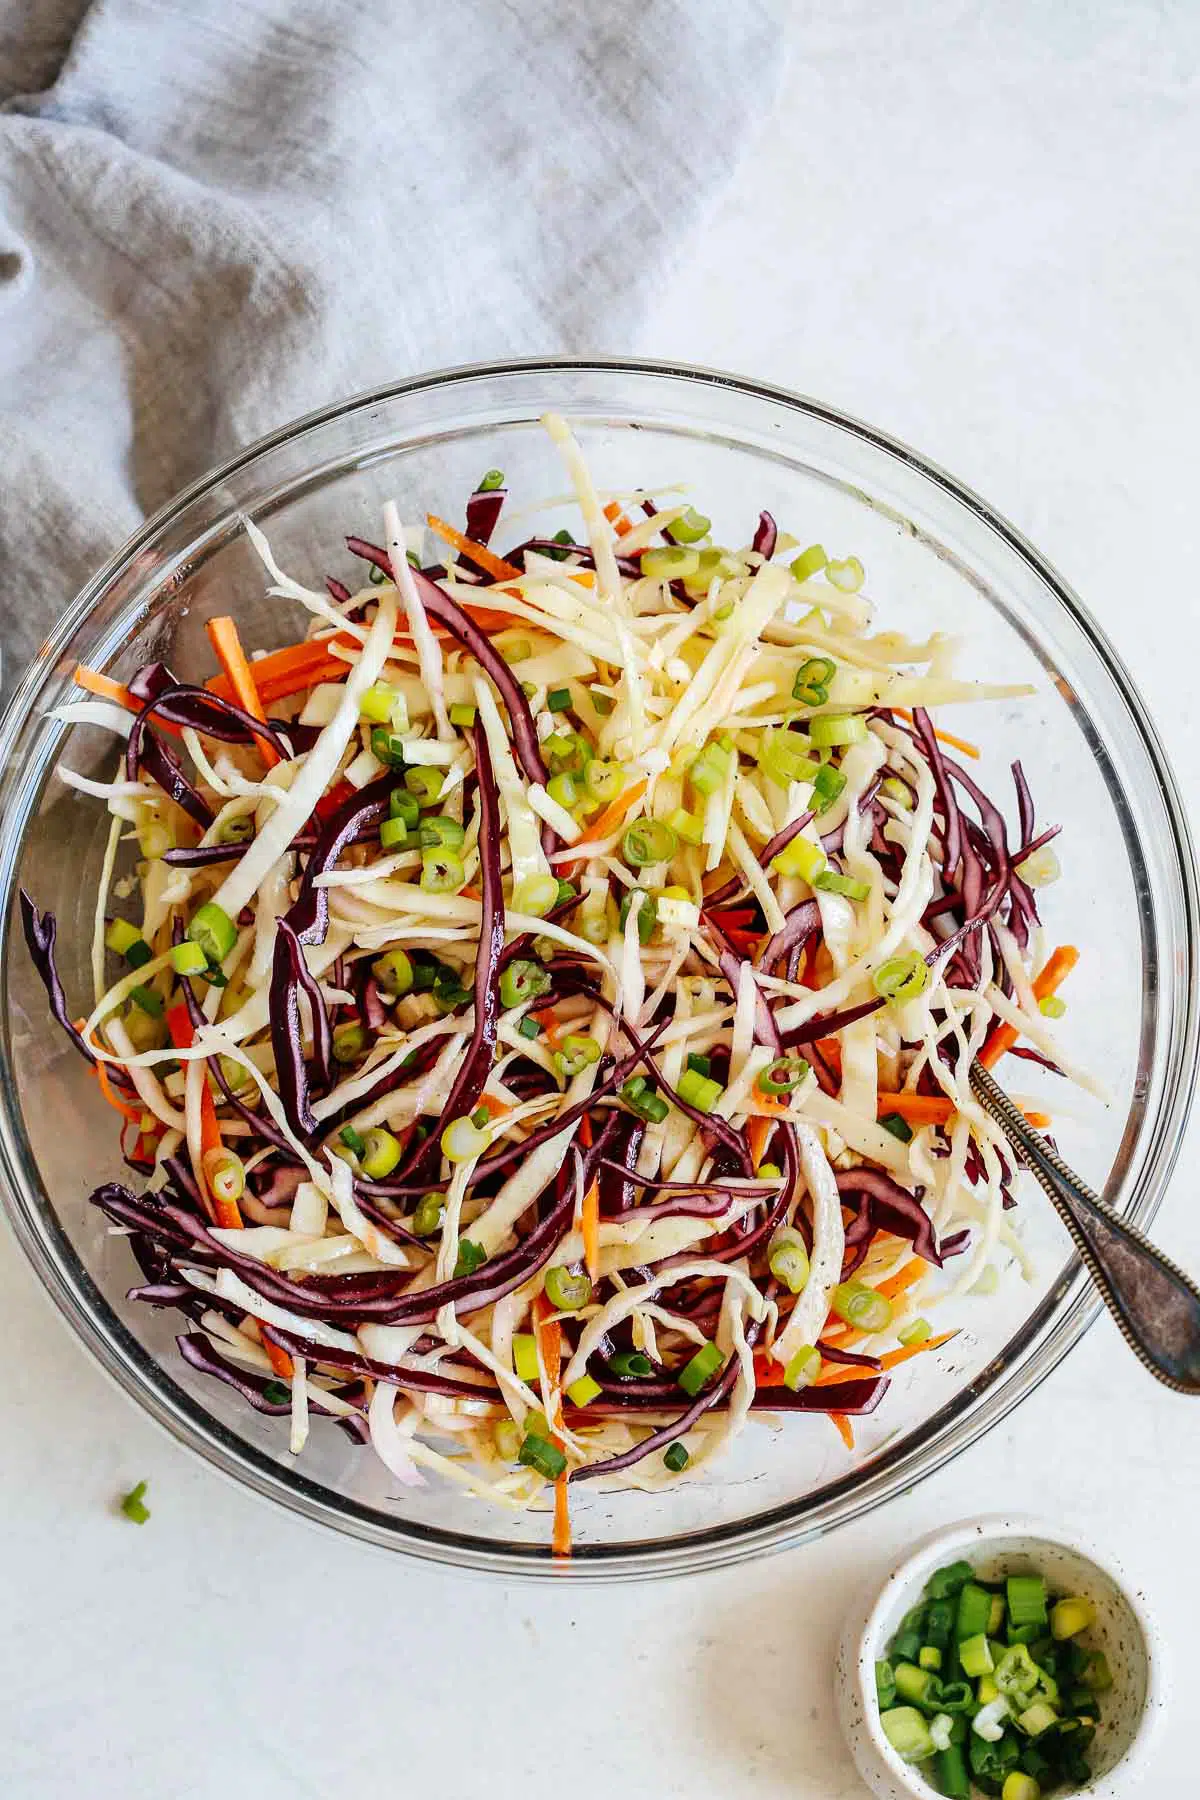 shredded vegetables and a spoon in a bowl sitting on a white towel